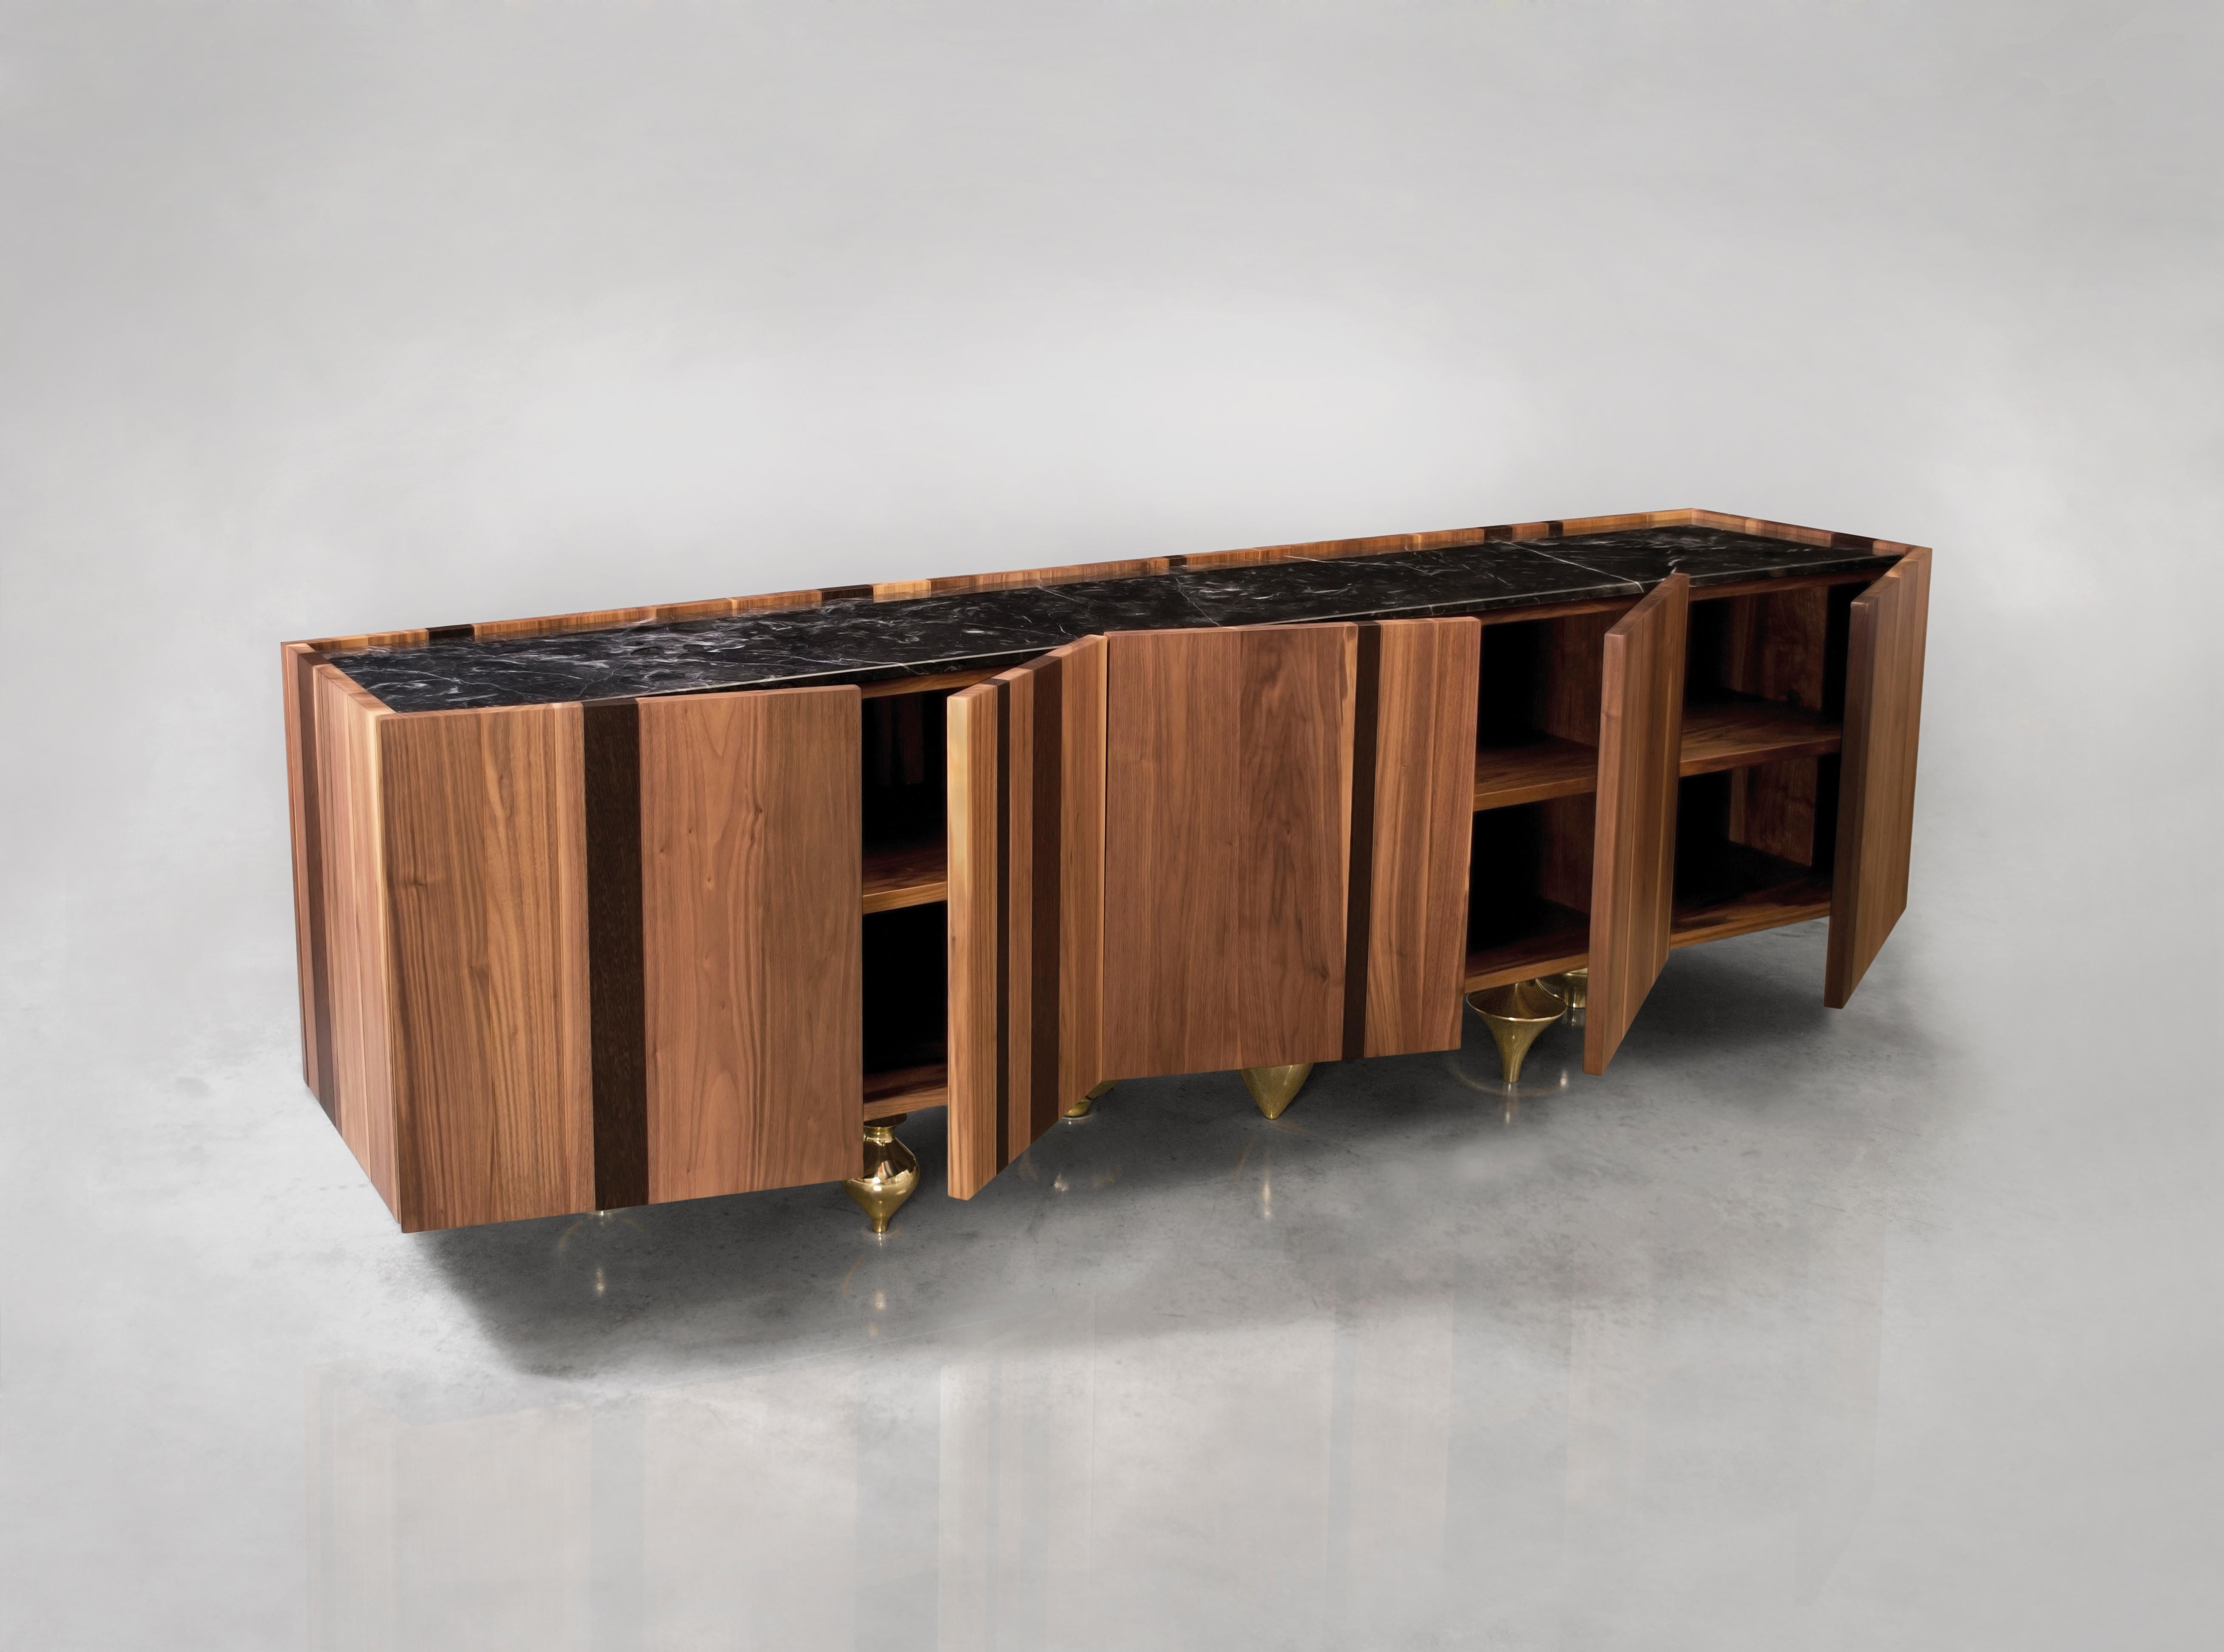 Il Pezzo 1 credenza
An alternation of rounded shapes and geometrical lines, reassuming discipline and freedom, a composite, multiethnic plan in which each com- ponent and each material contributes to the harmonious balance of the piece. Il Pezzo 1